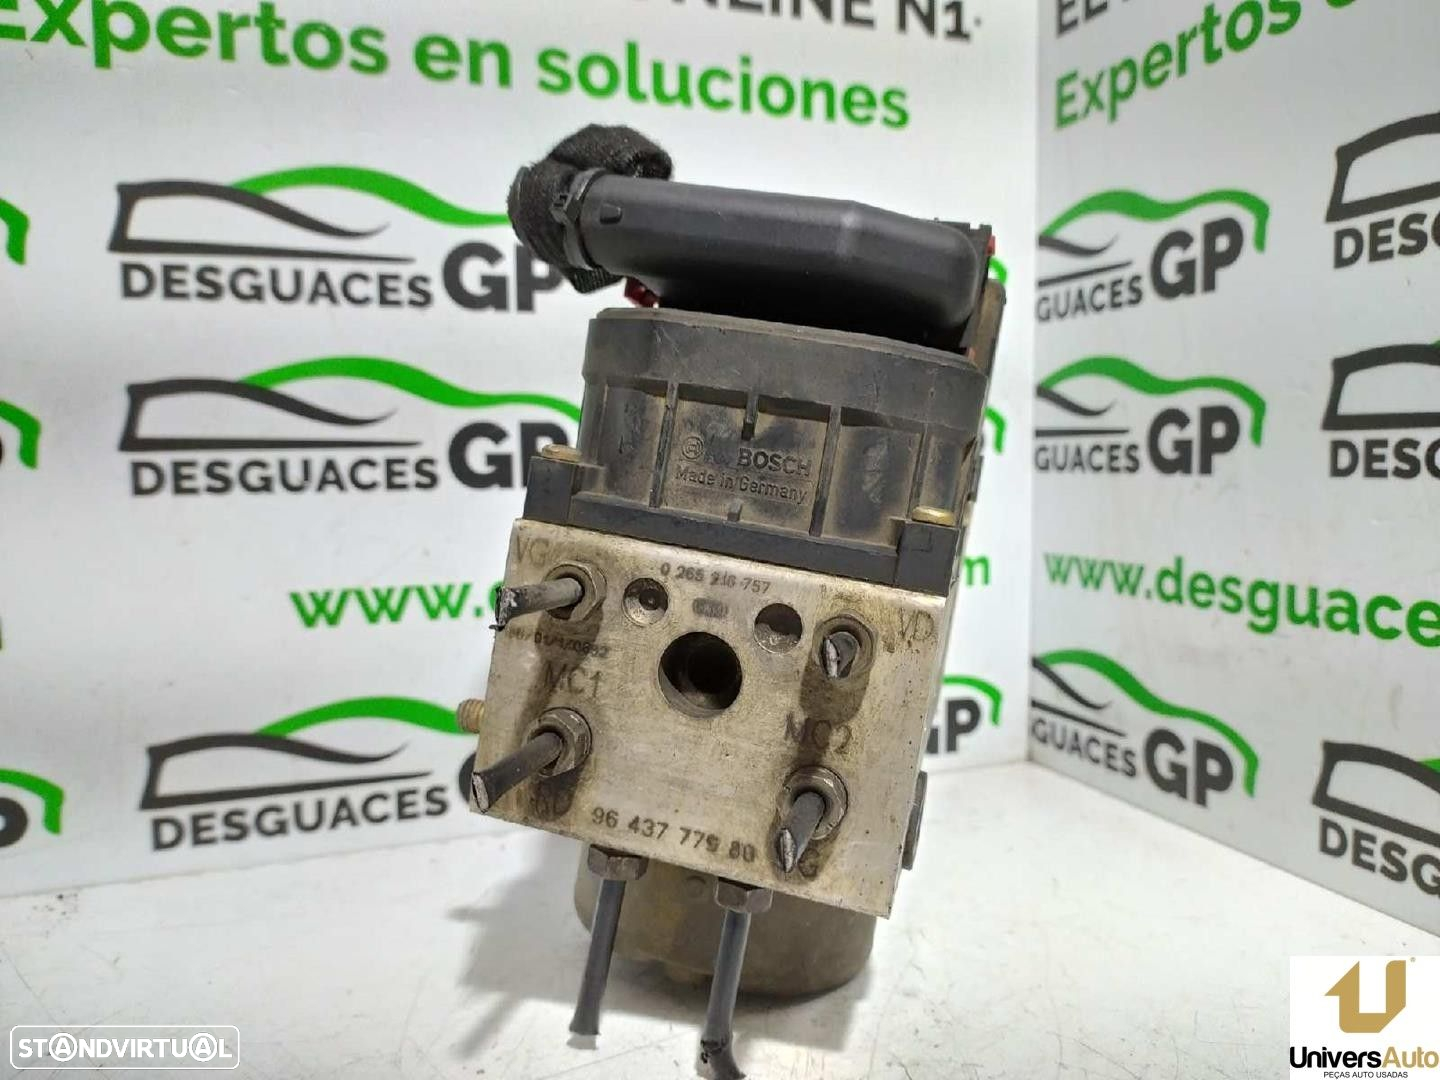 ABS PEUGEOT 307 2002 -9643777980 - 7